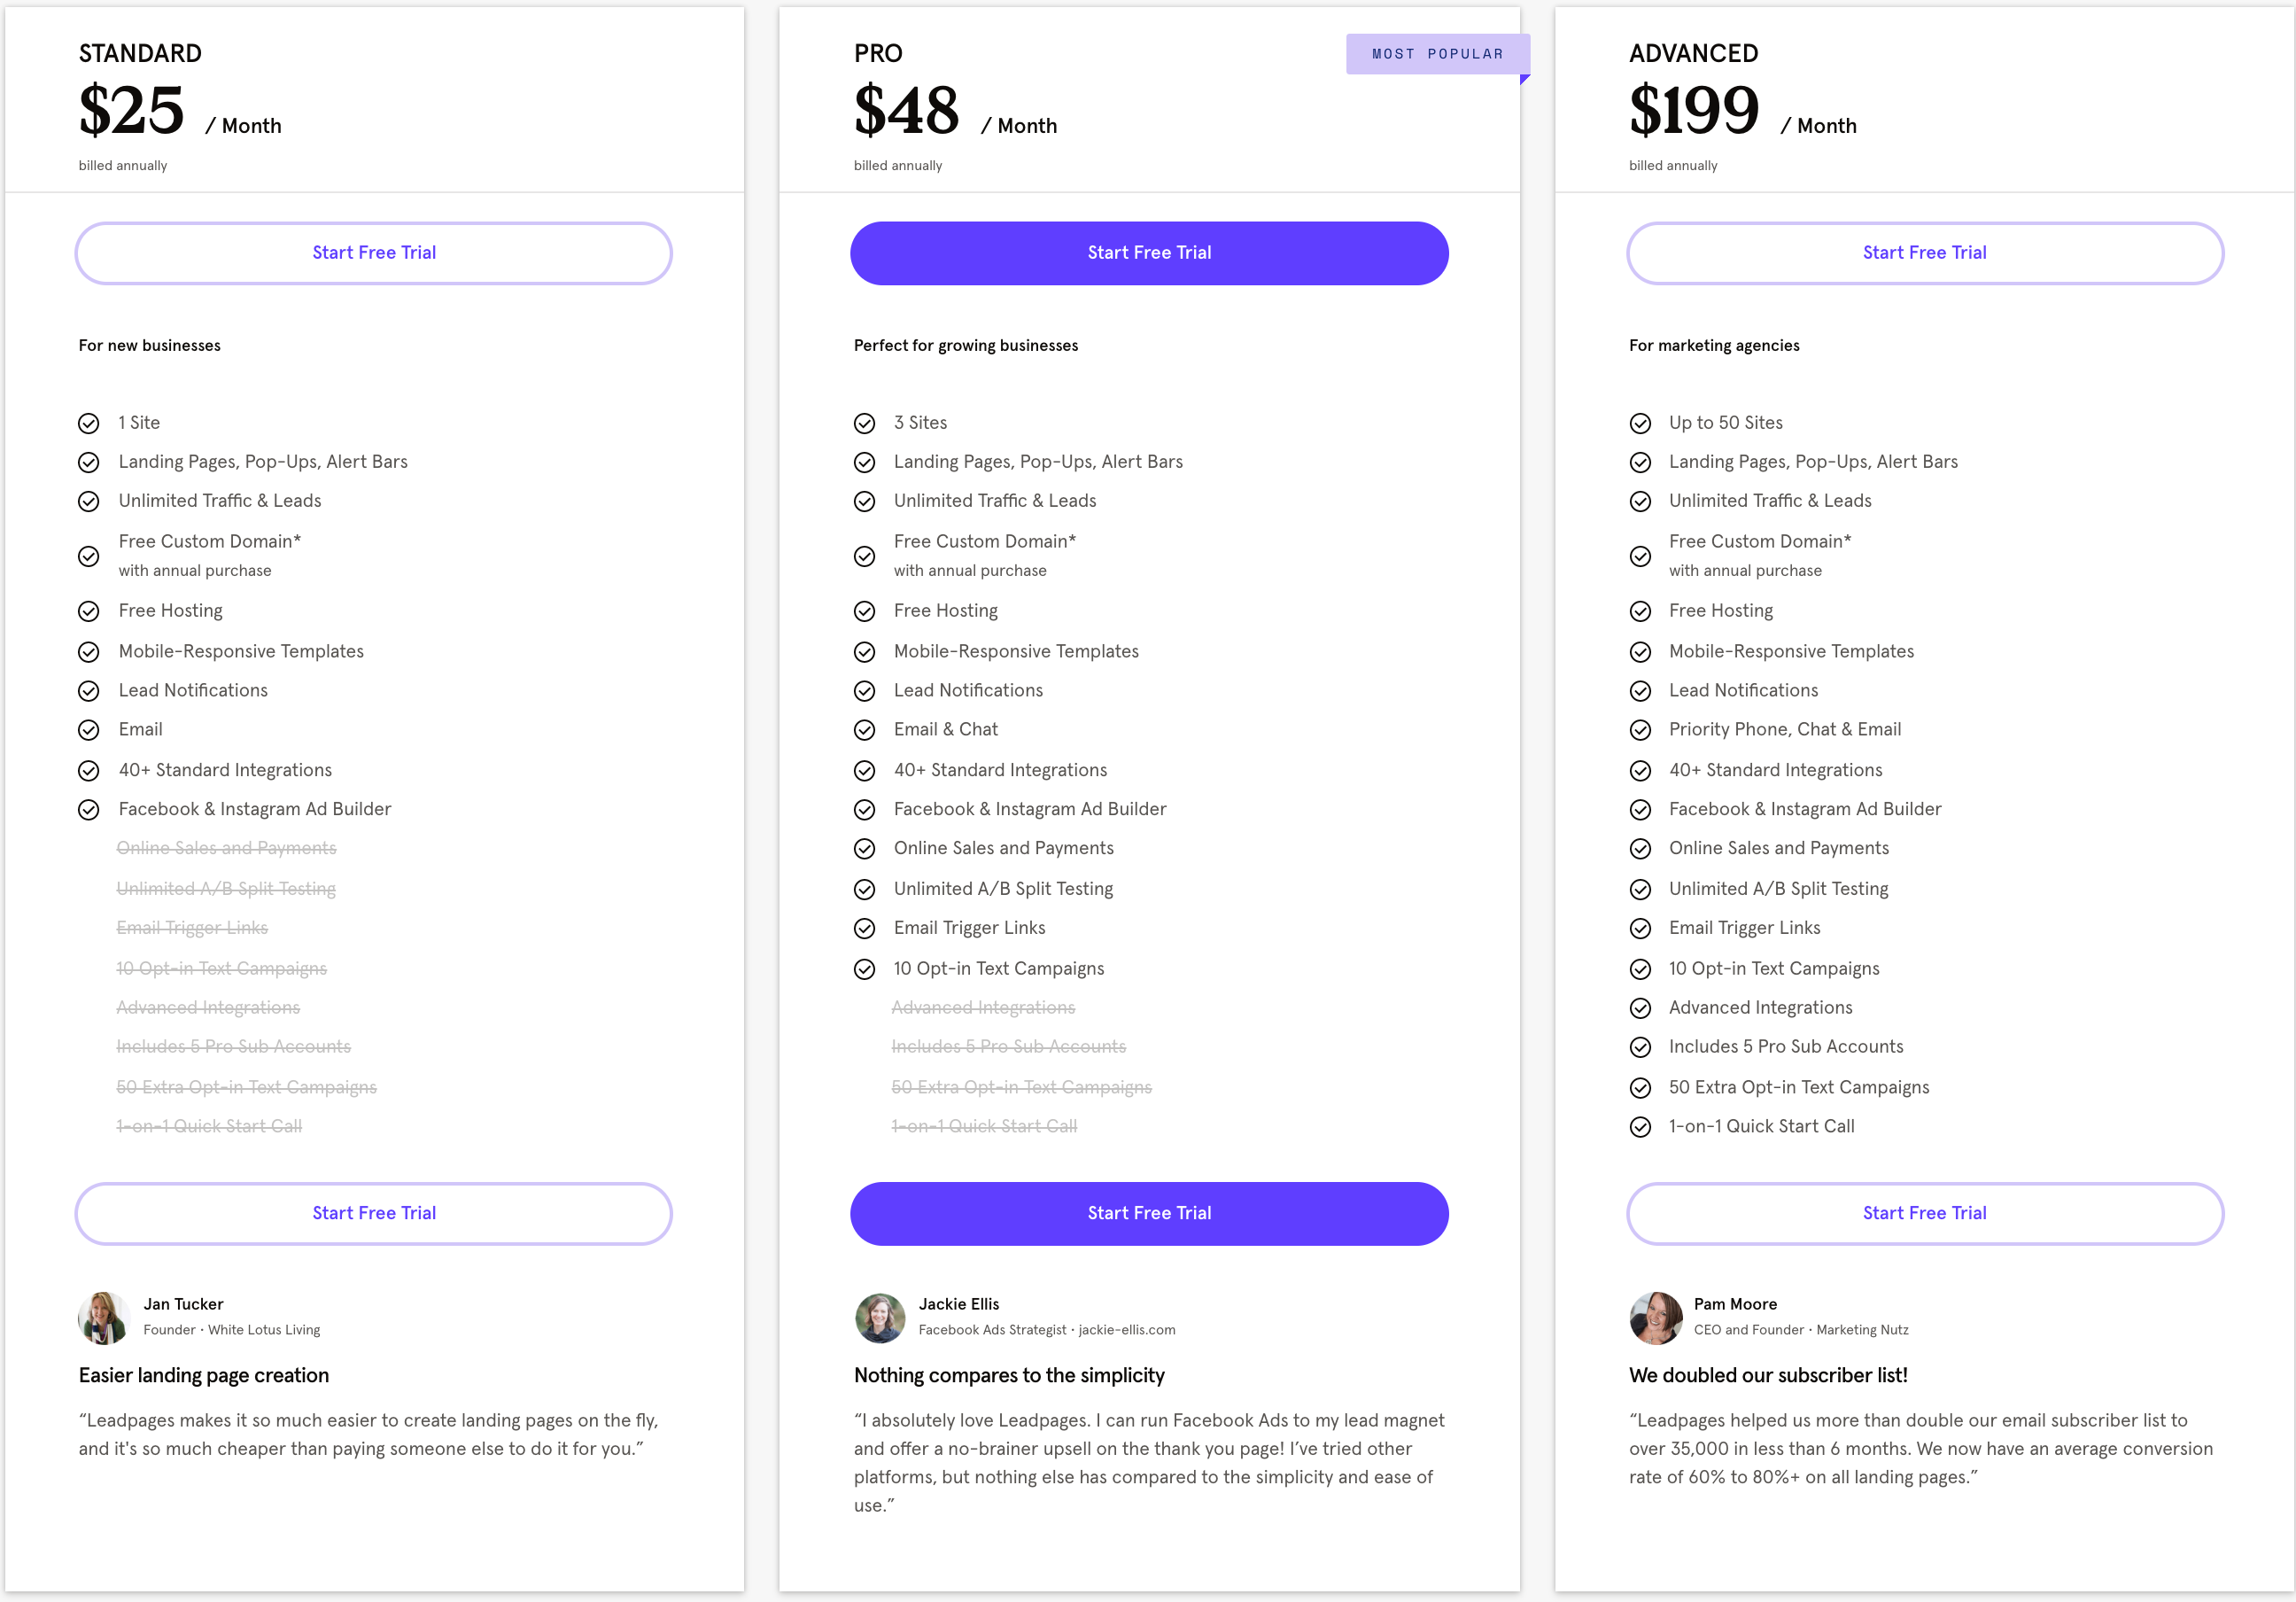 Leadpages-Pricing